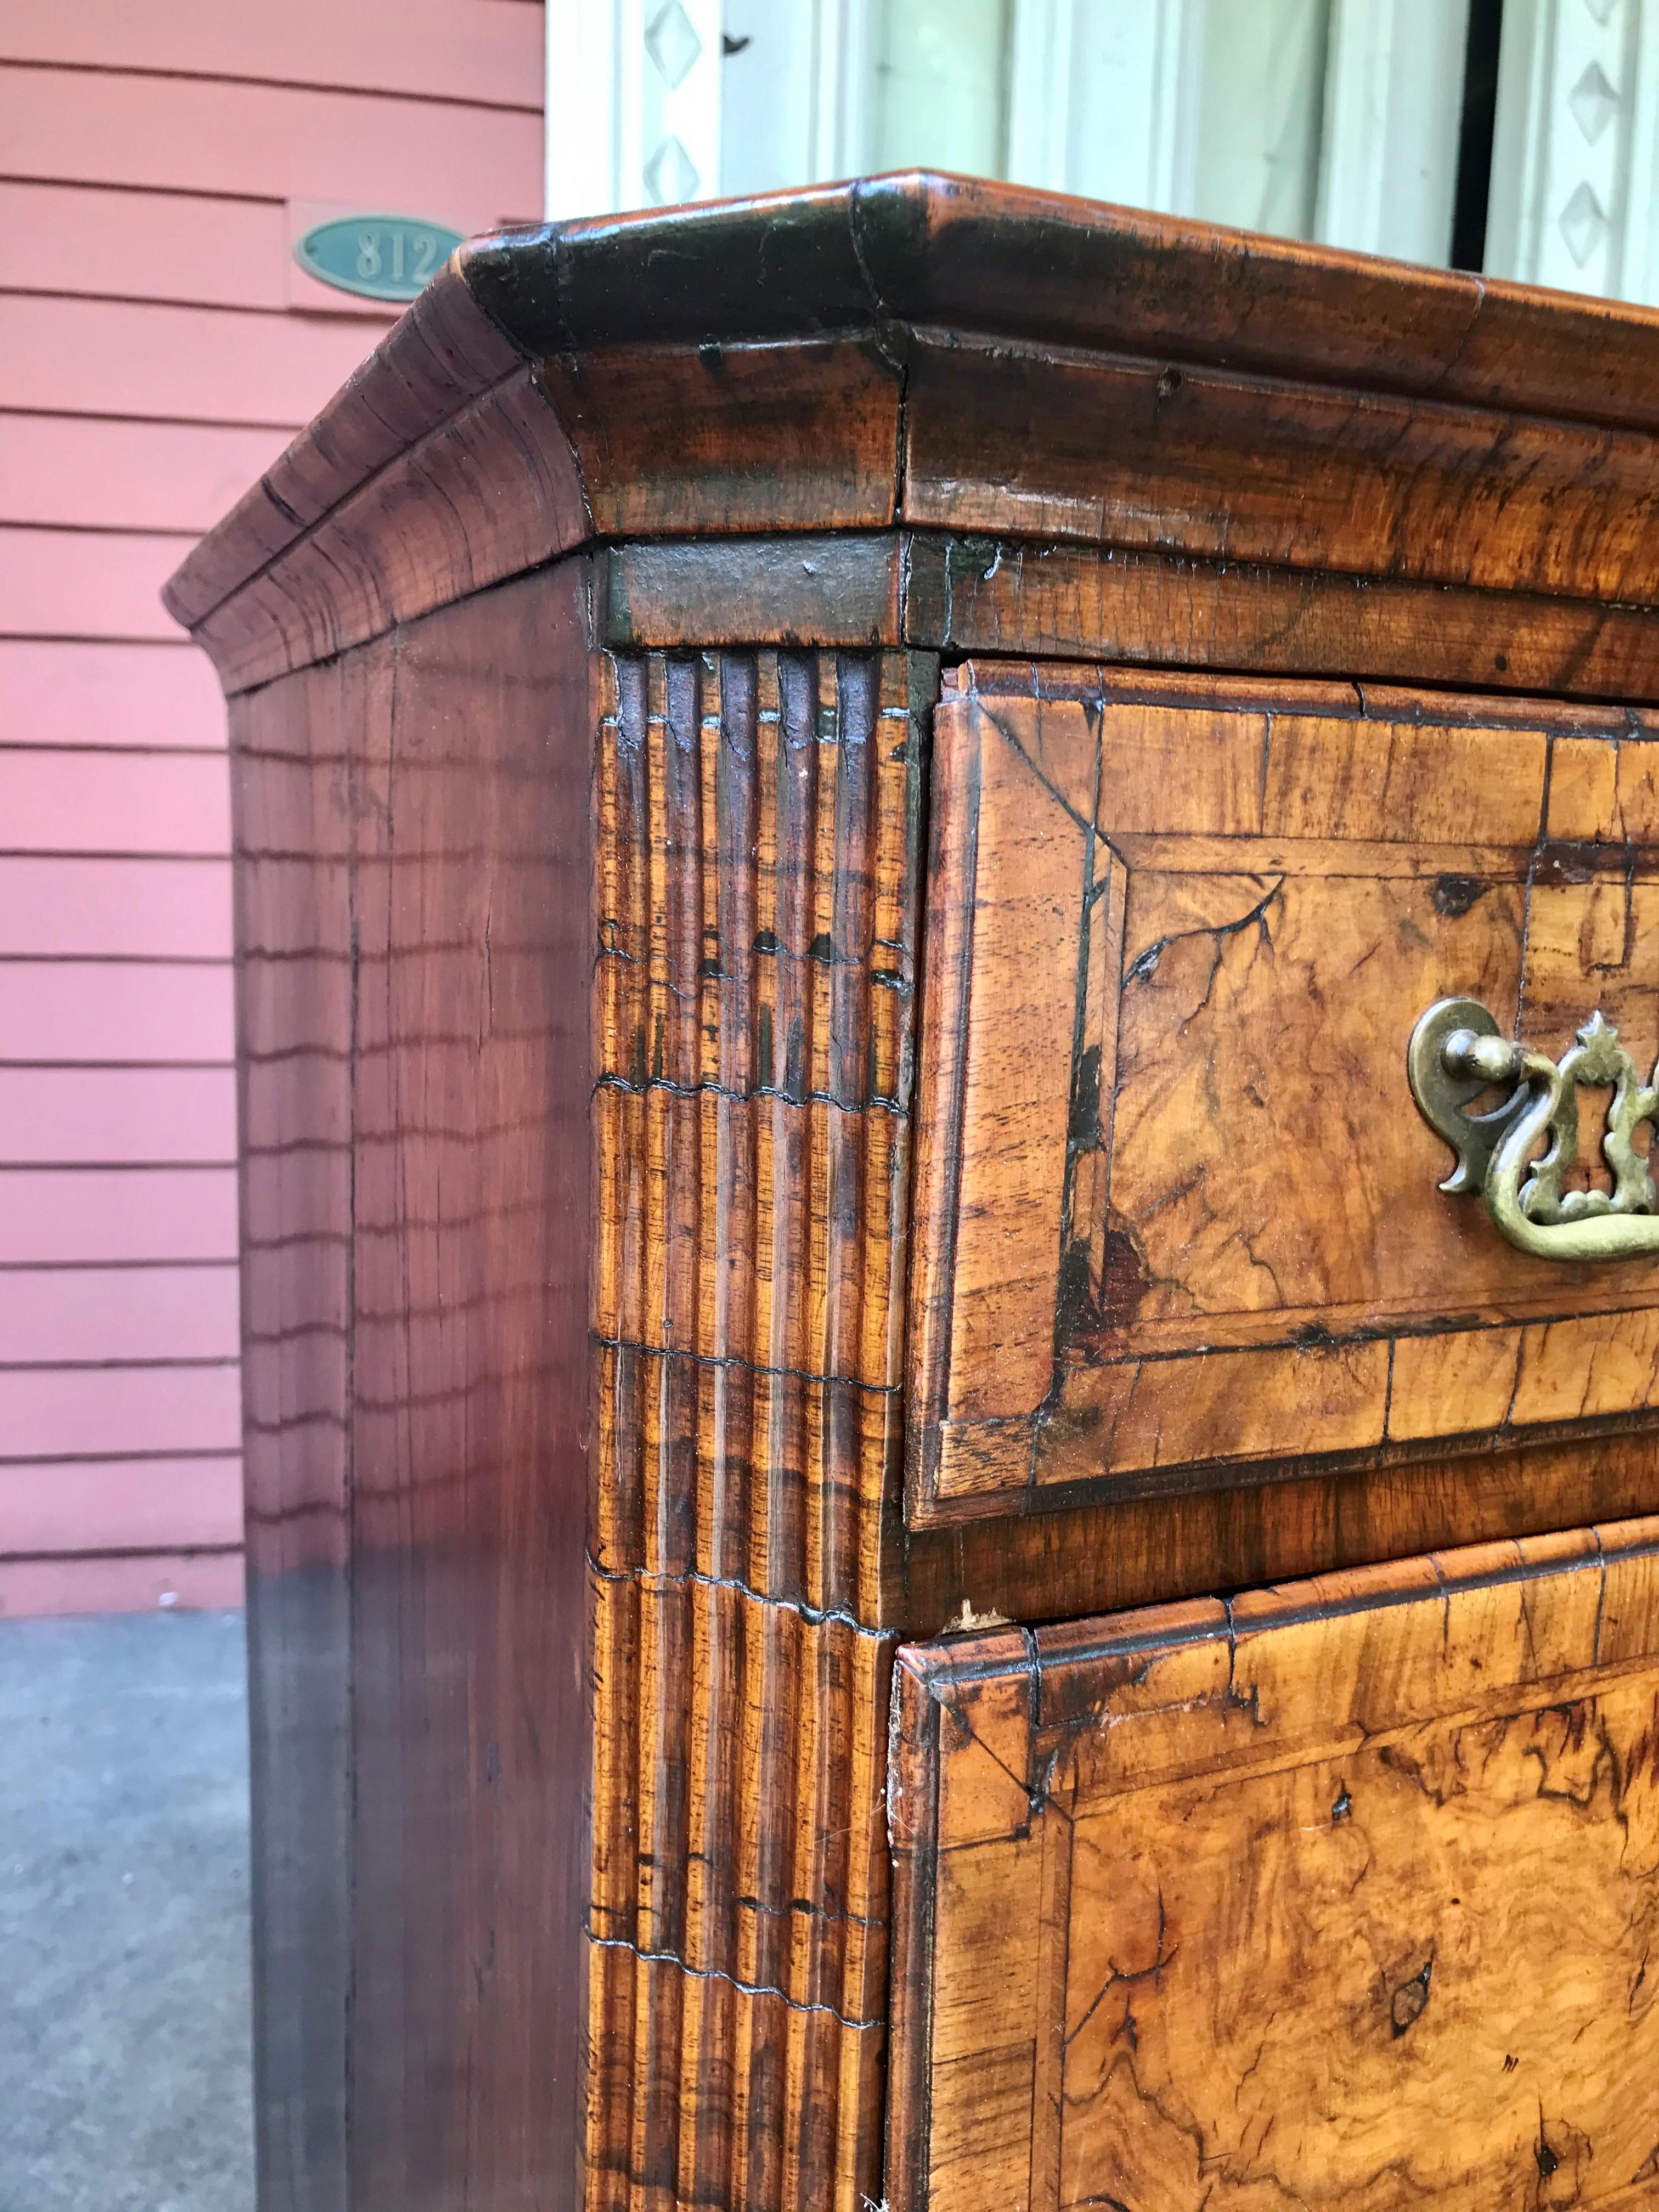 Sturdy Georgian chest. Stunning veneers and light color. The sides are solid boards.The top well worn and used ( note photo).Feet are later ,as is the hardware. Warm patina and color. The canted corners fluted or ribbed. with key.  Shows well .

The